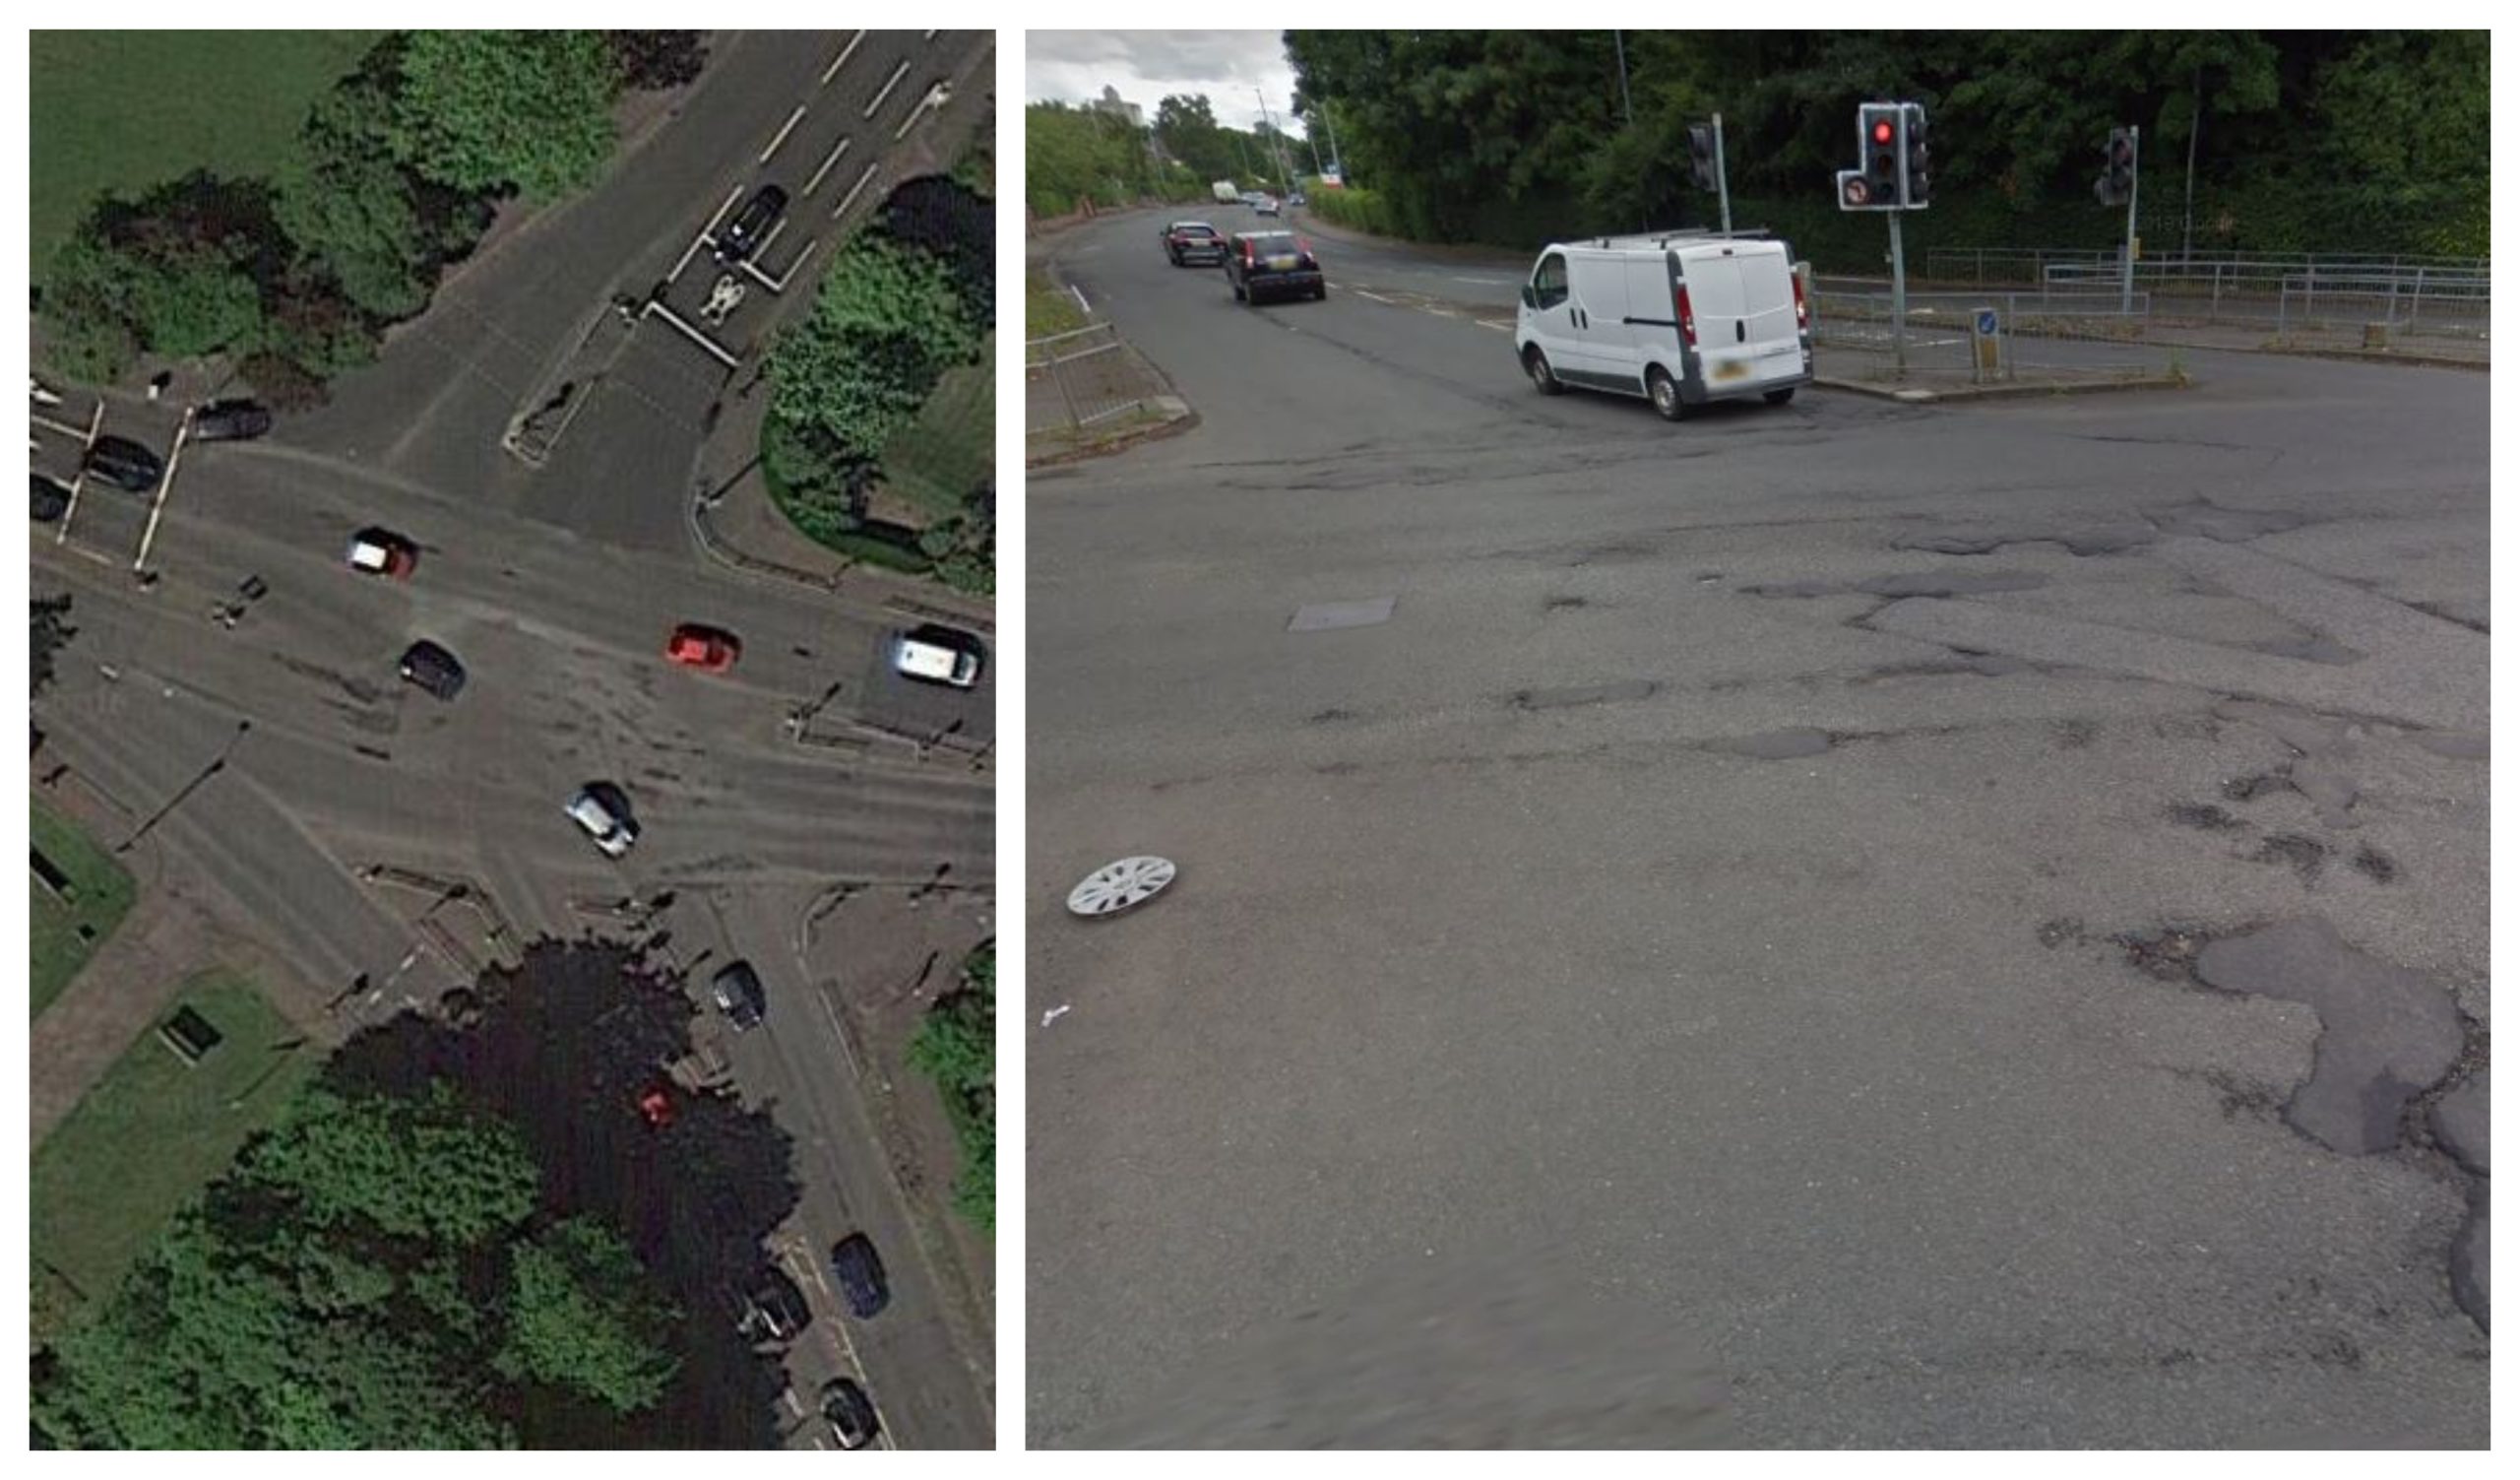 Potholes in Titwood Road, Glasgow, are visible on satellite images while street-level views reveal hubcaps lost by vehicles 
on pitted road